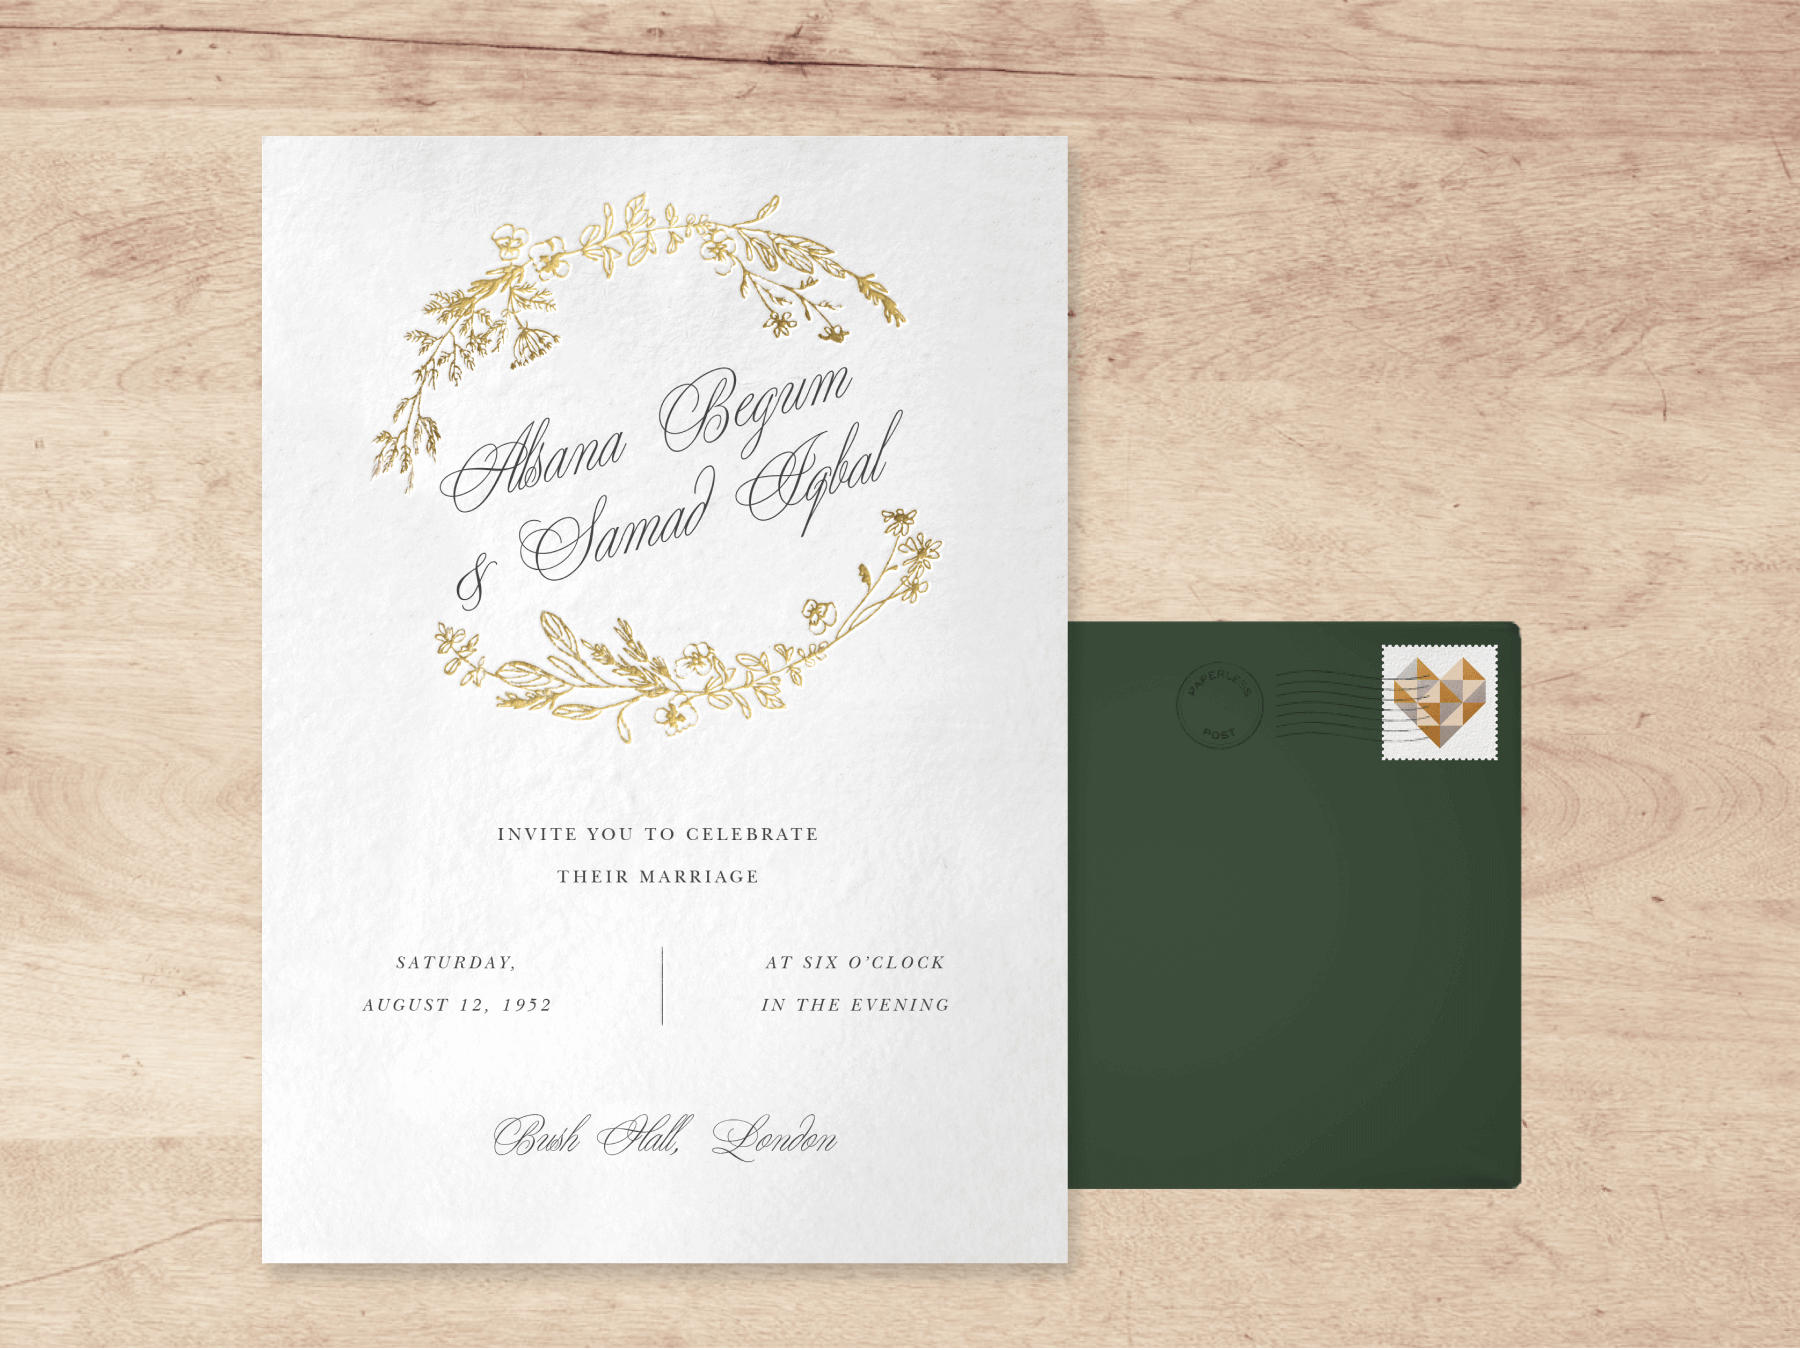 A white wedding invitation with gold sprigs circling the couple’s names written in script with a green envelope and a stamp with a geometric heart, all on a wood grain background.